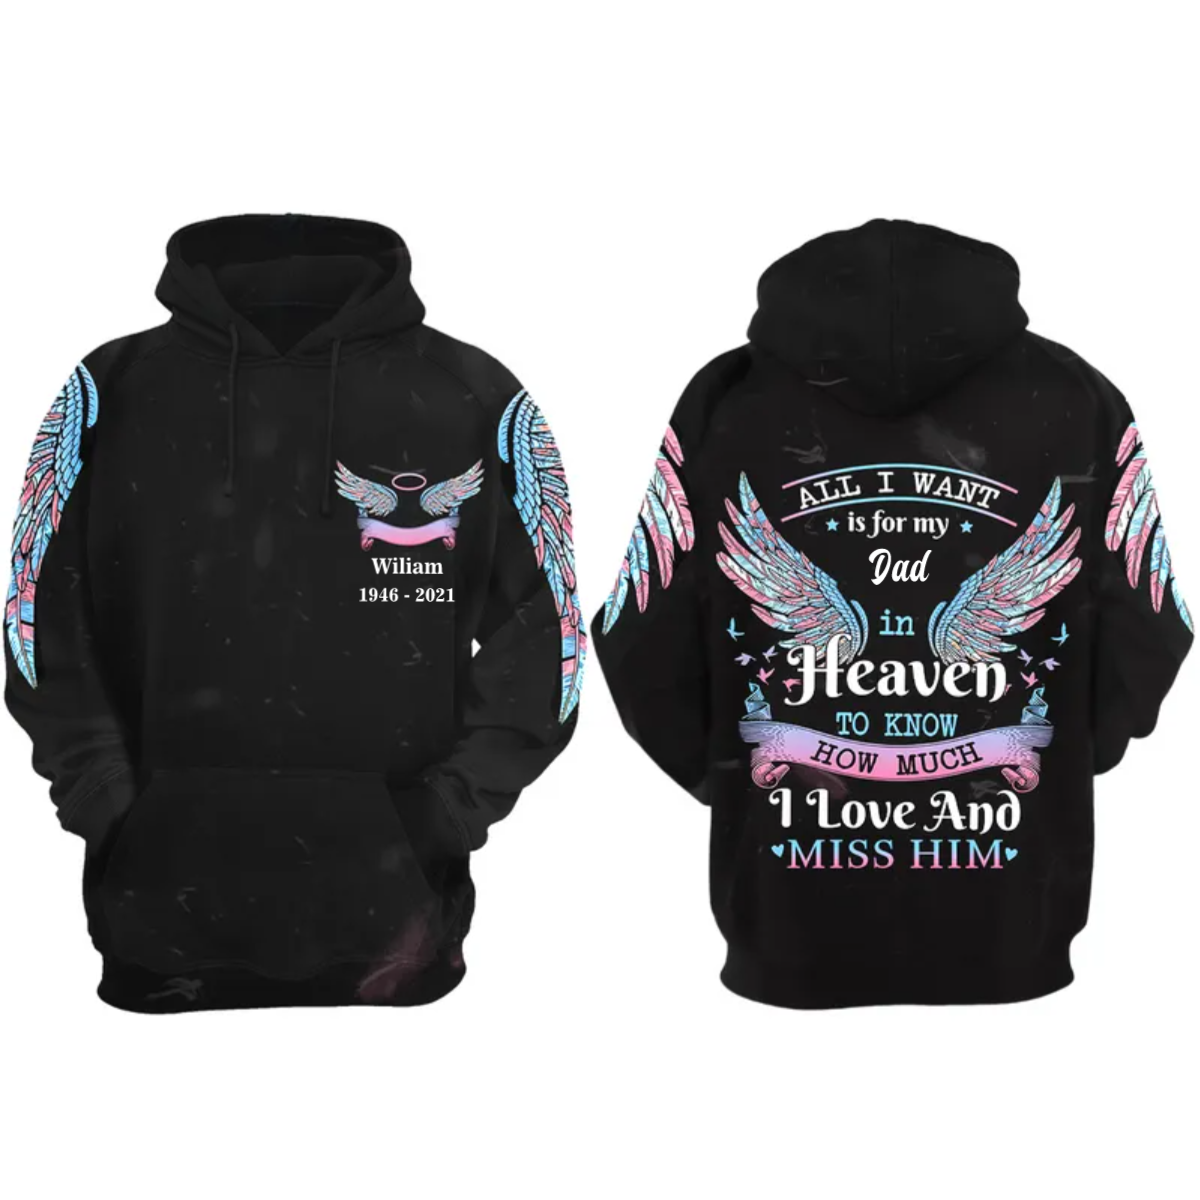 3D Full Print Remembrance Hoodie/ Memorial Apparel/ Loss Of Husband Clothing/ All I Want is For My Loved Ones In Heaven